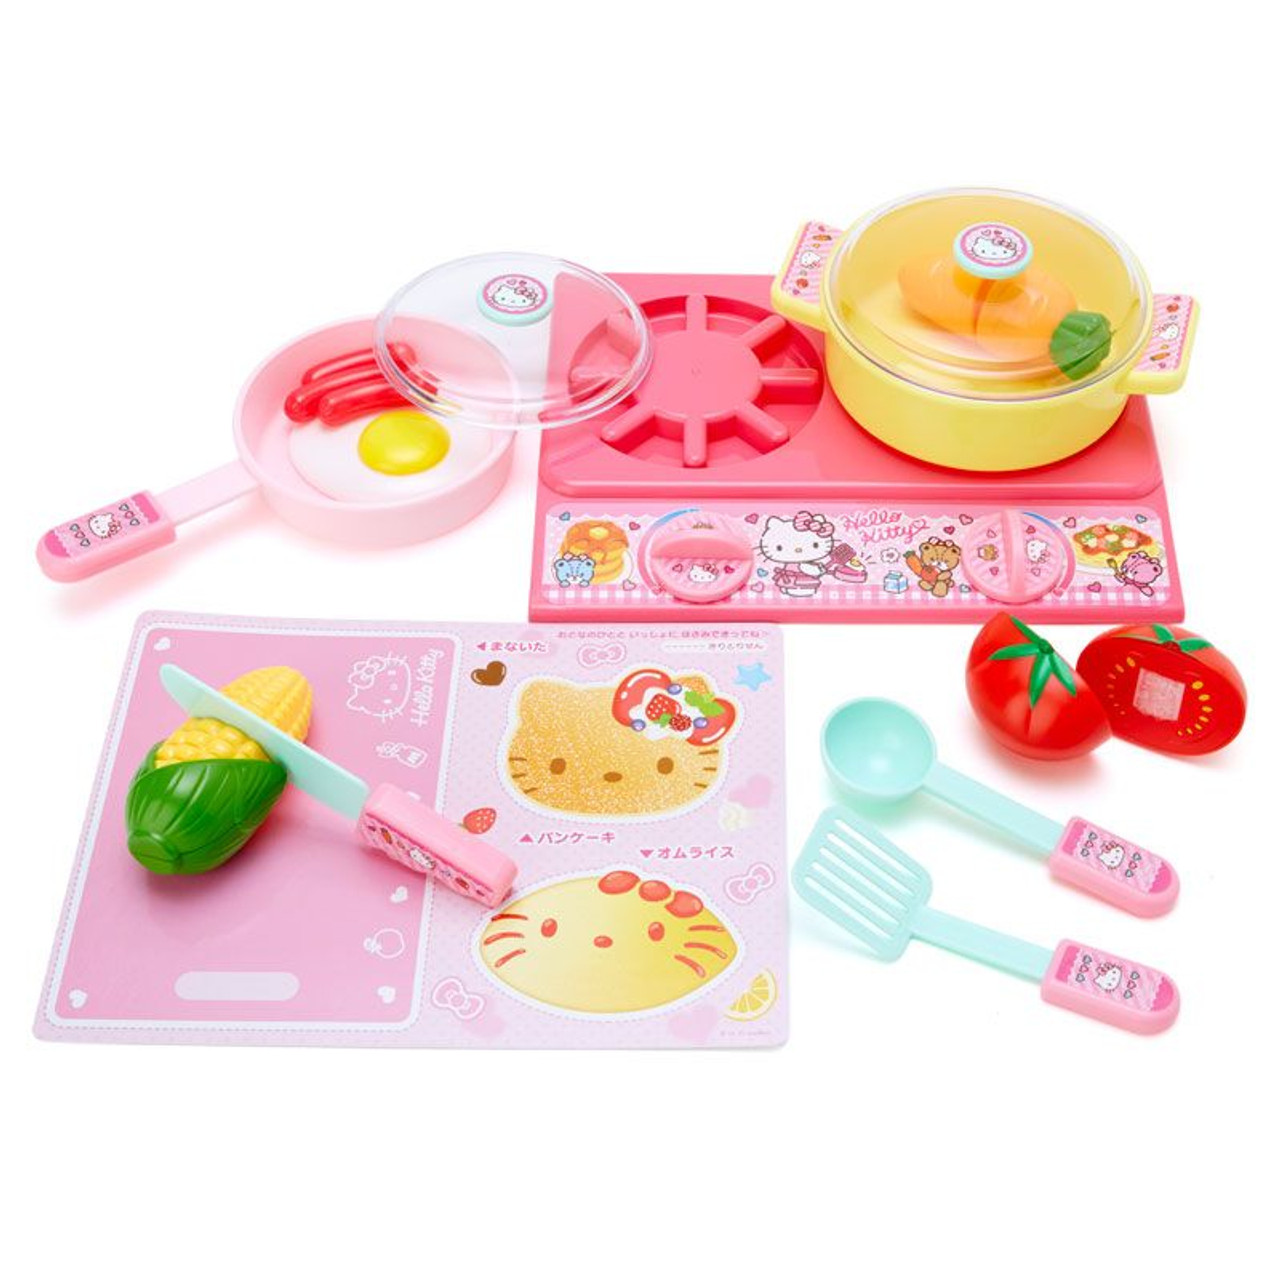 Hello kitty Table Mini Cooker Pot Discontinued Unused Sanrio official NEW